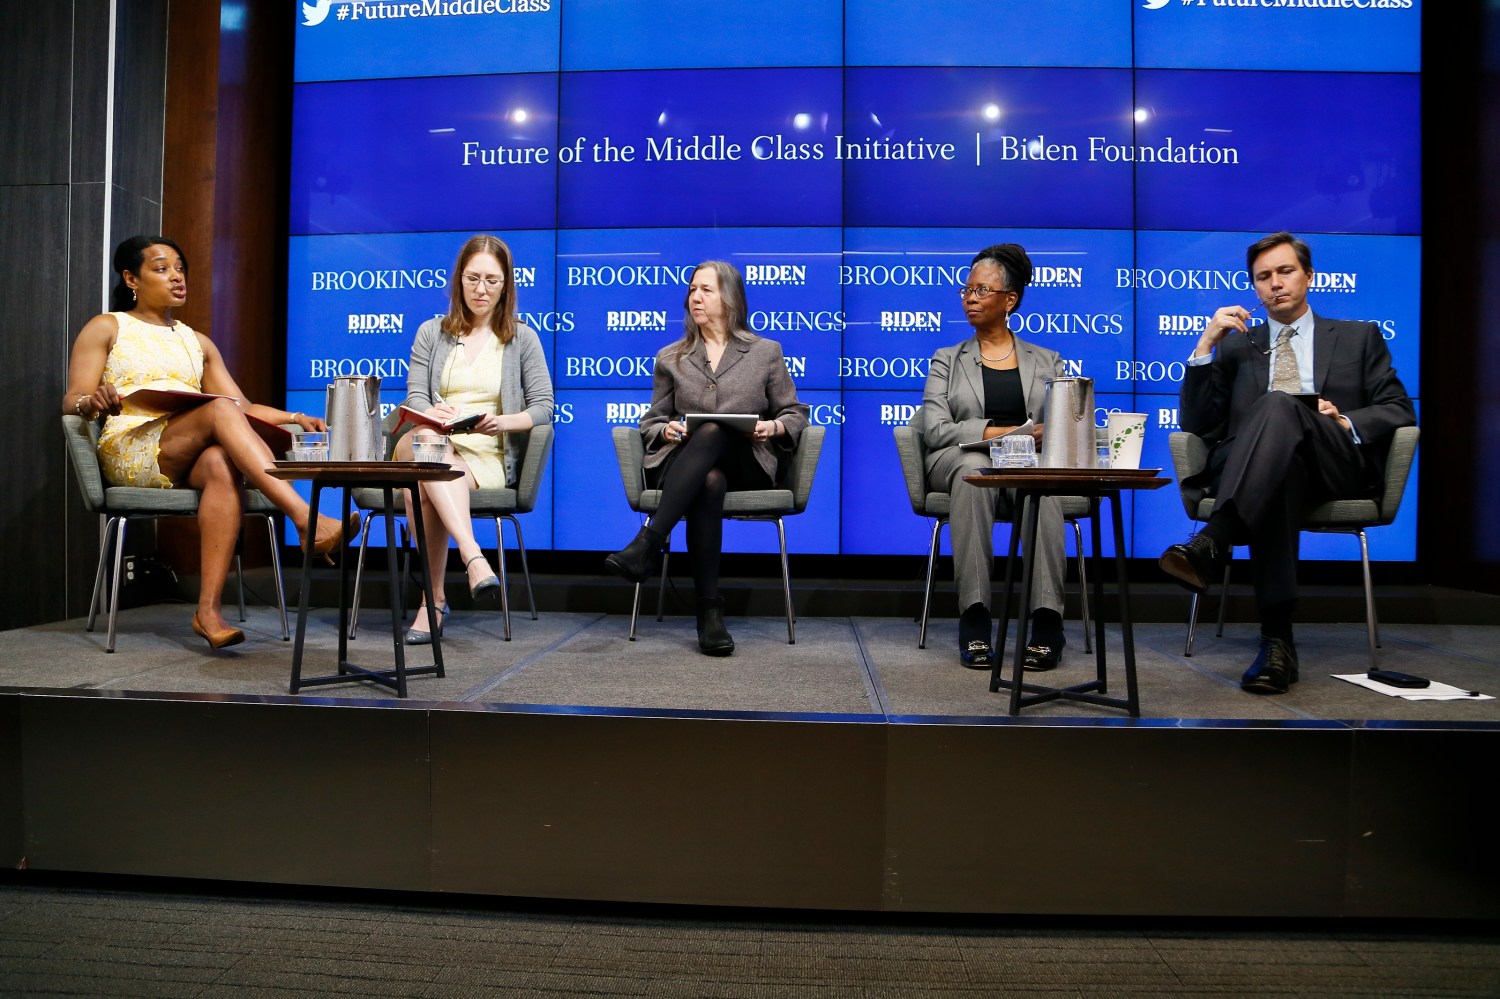 Panelists on stage at the launch event of the Future of the Middle Class Initiative.